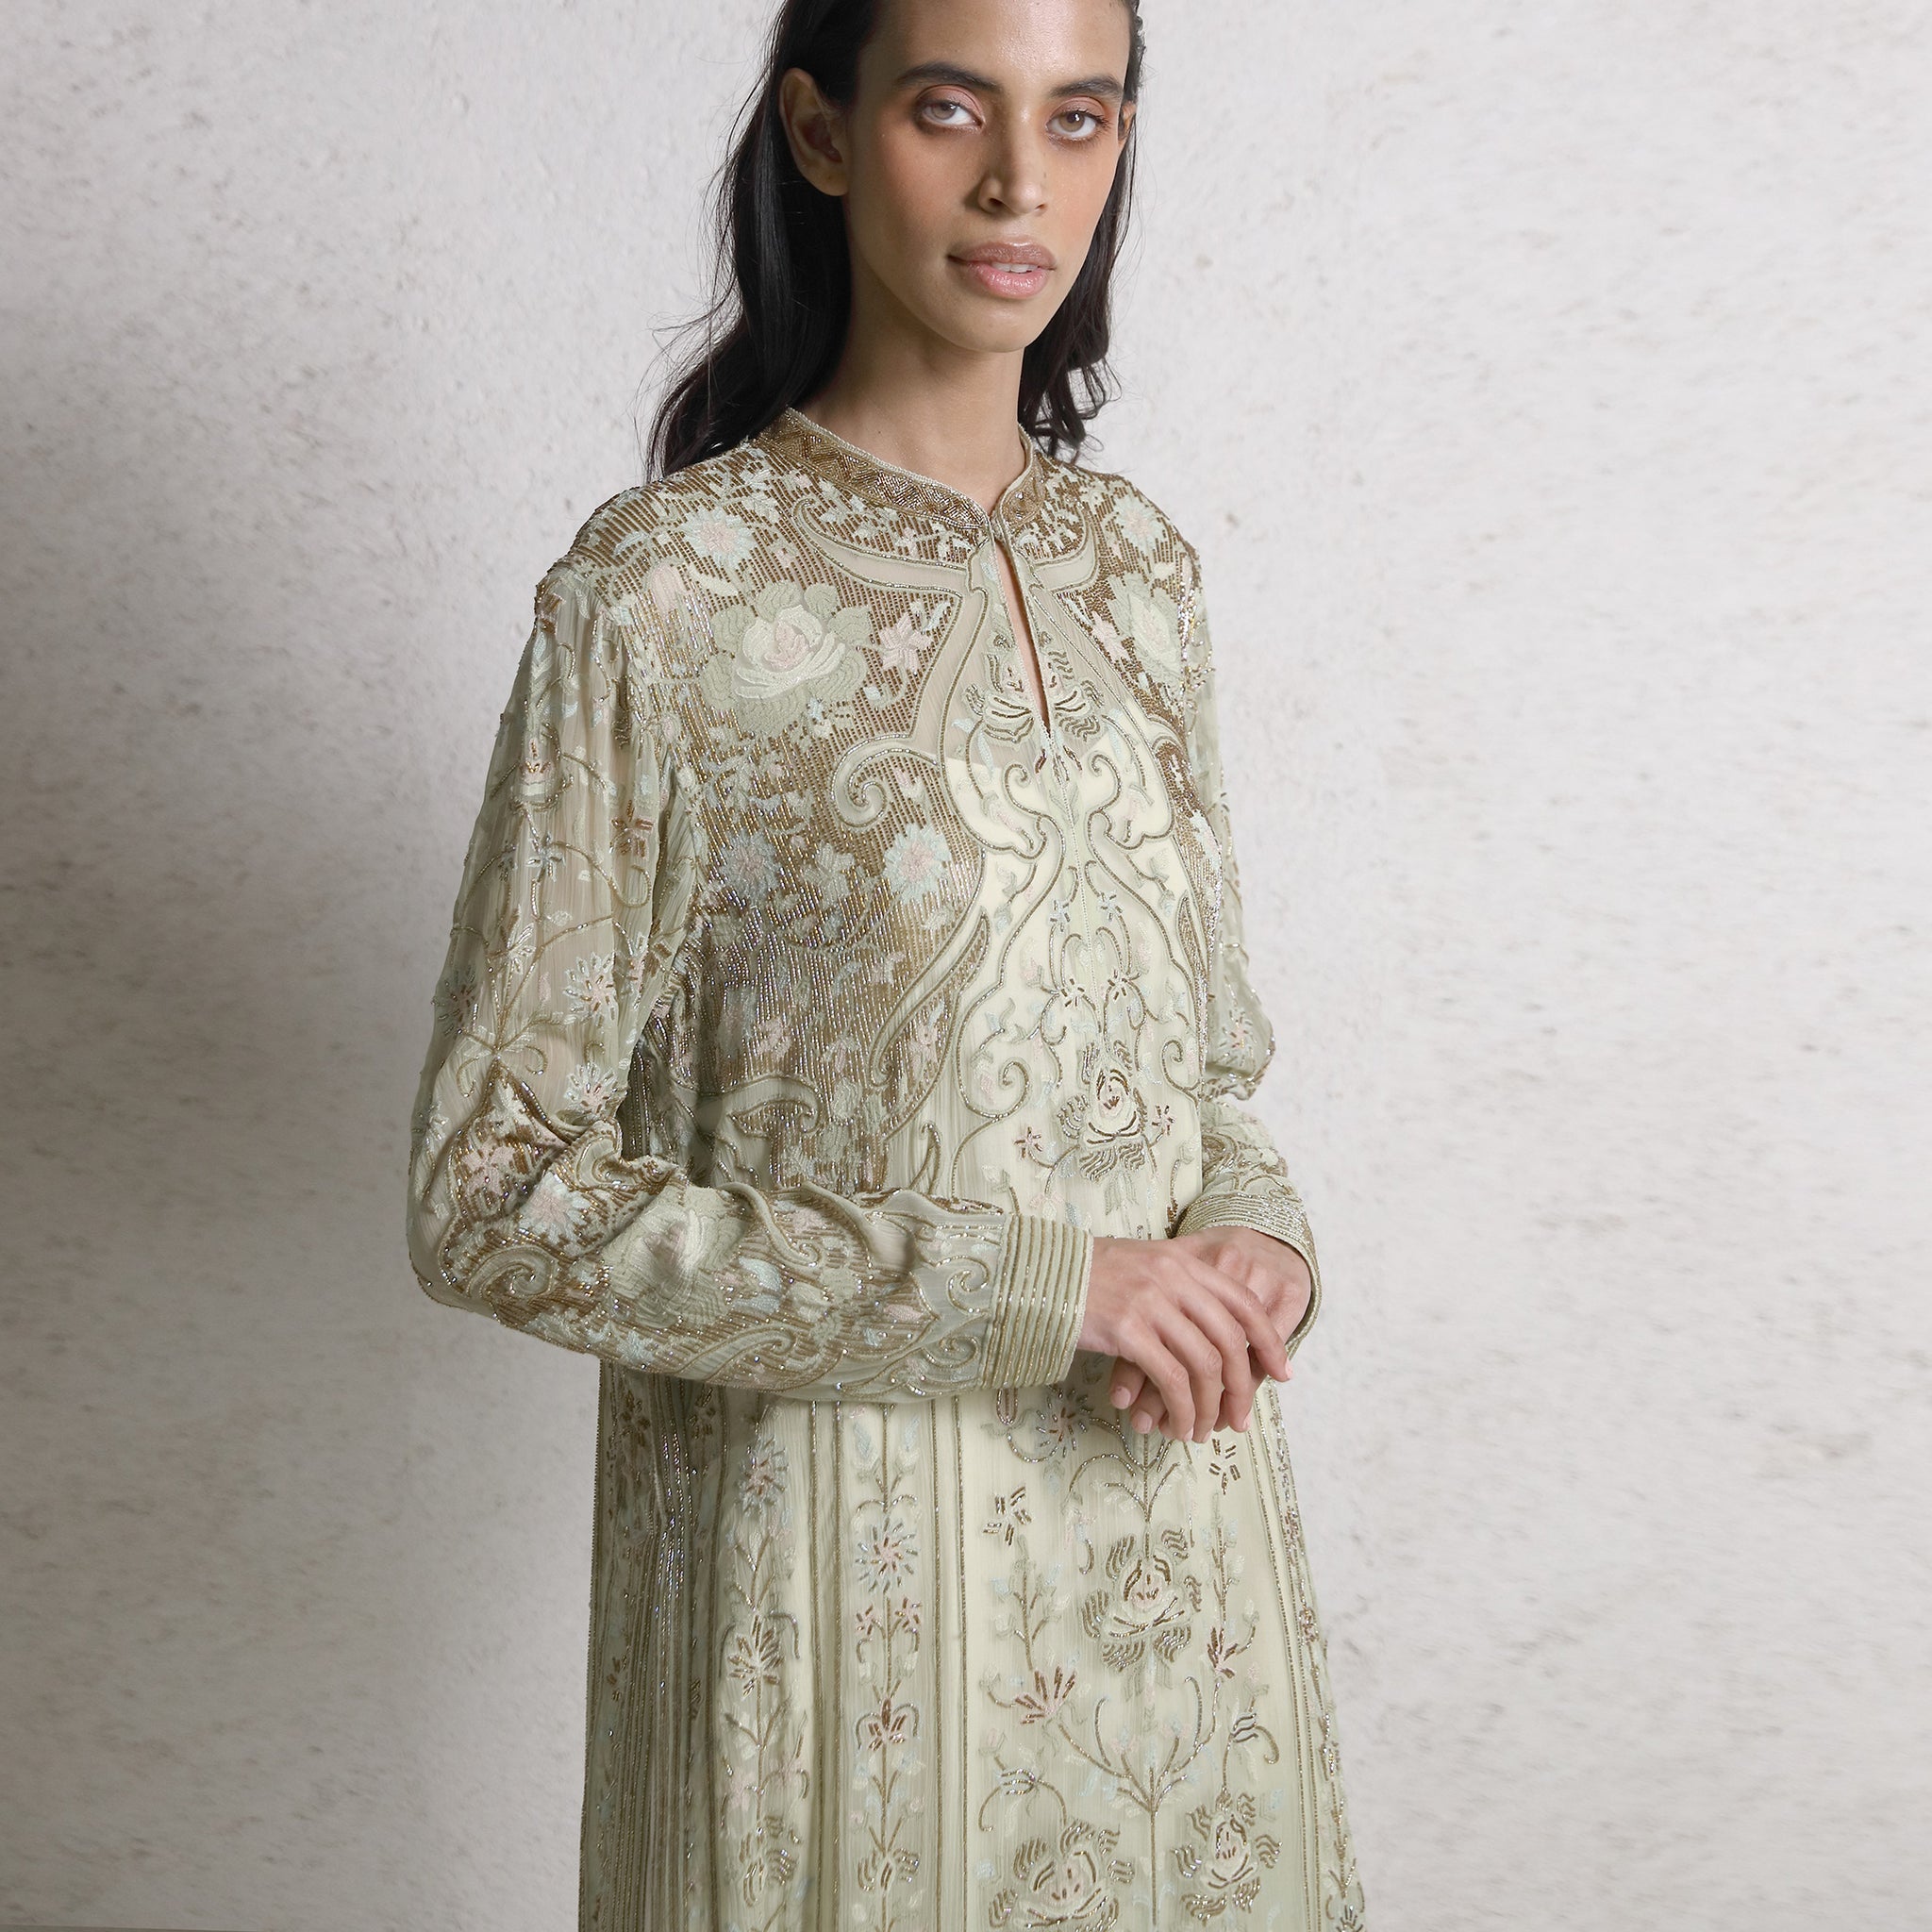 Multi-color fine shadow works chiffon straight cut kurta with Cutdana detailing paired with the draped inner layer, pants, and stole. The look has underline bling with elegance. The style has a good drape and adds a delicate feel to the person wearing it. A look that completely works for a day or evening wedding. #Abhishekstudio #abhisheksharma  #fashiondesignerabhisheksharma #designerware #ambawattaone #lakmefashionweek #wommen’sware 